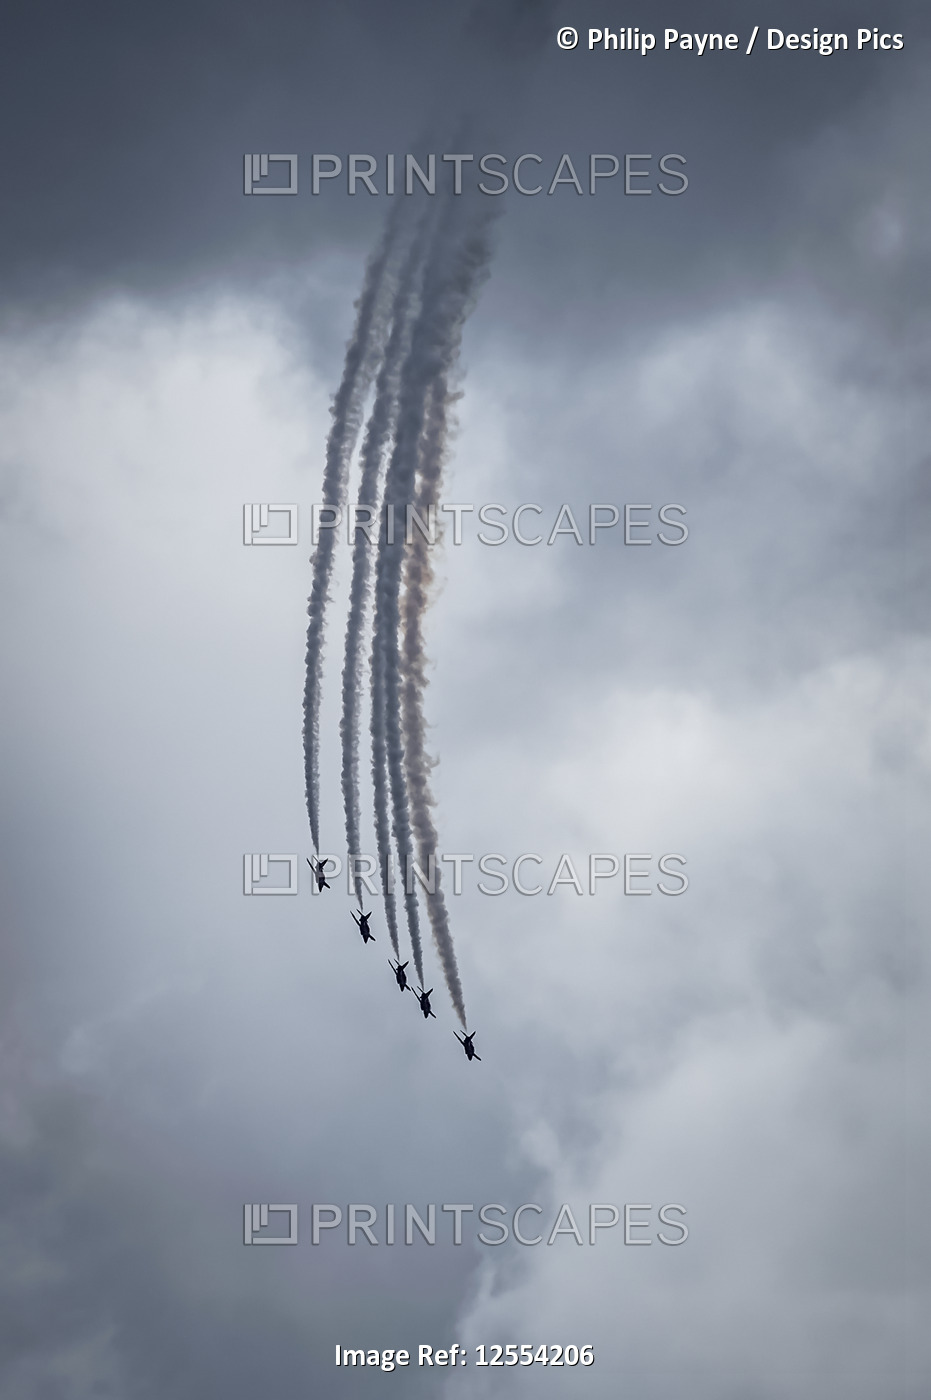 Red Arrows air display, five planes descending in flying formation against grey ...